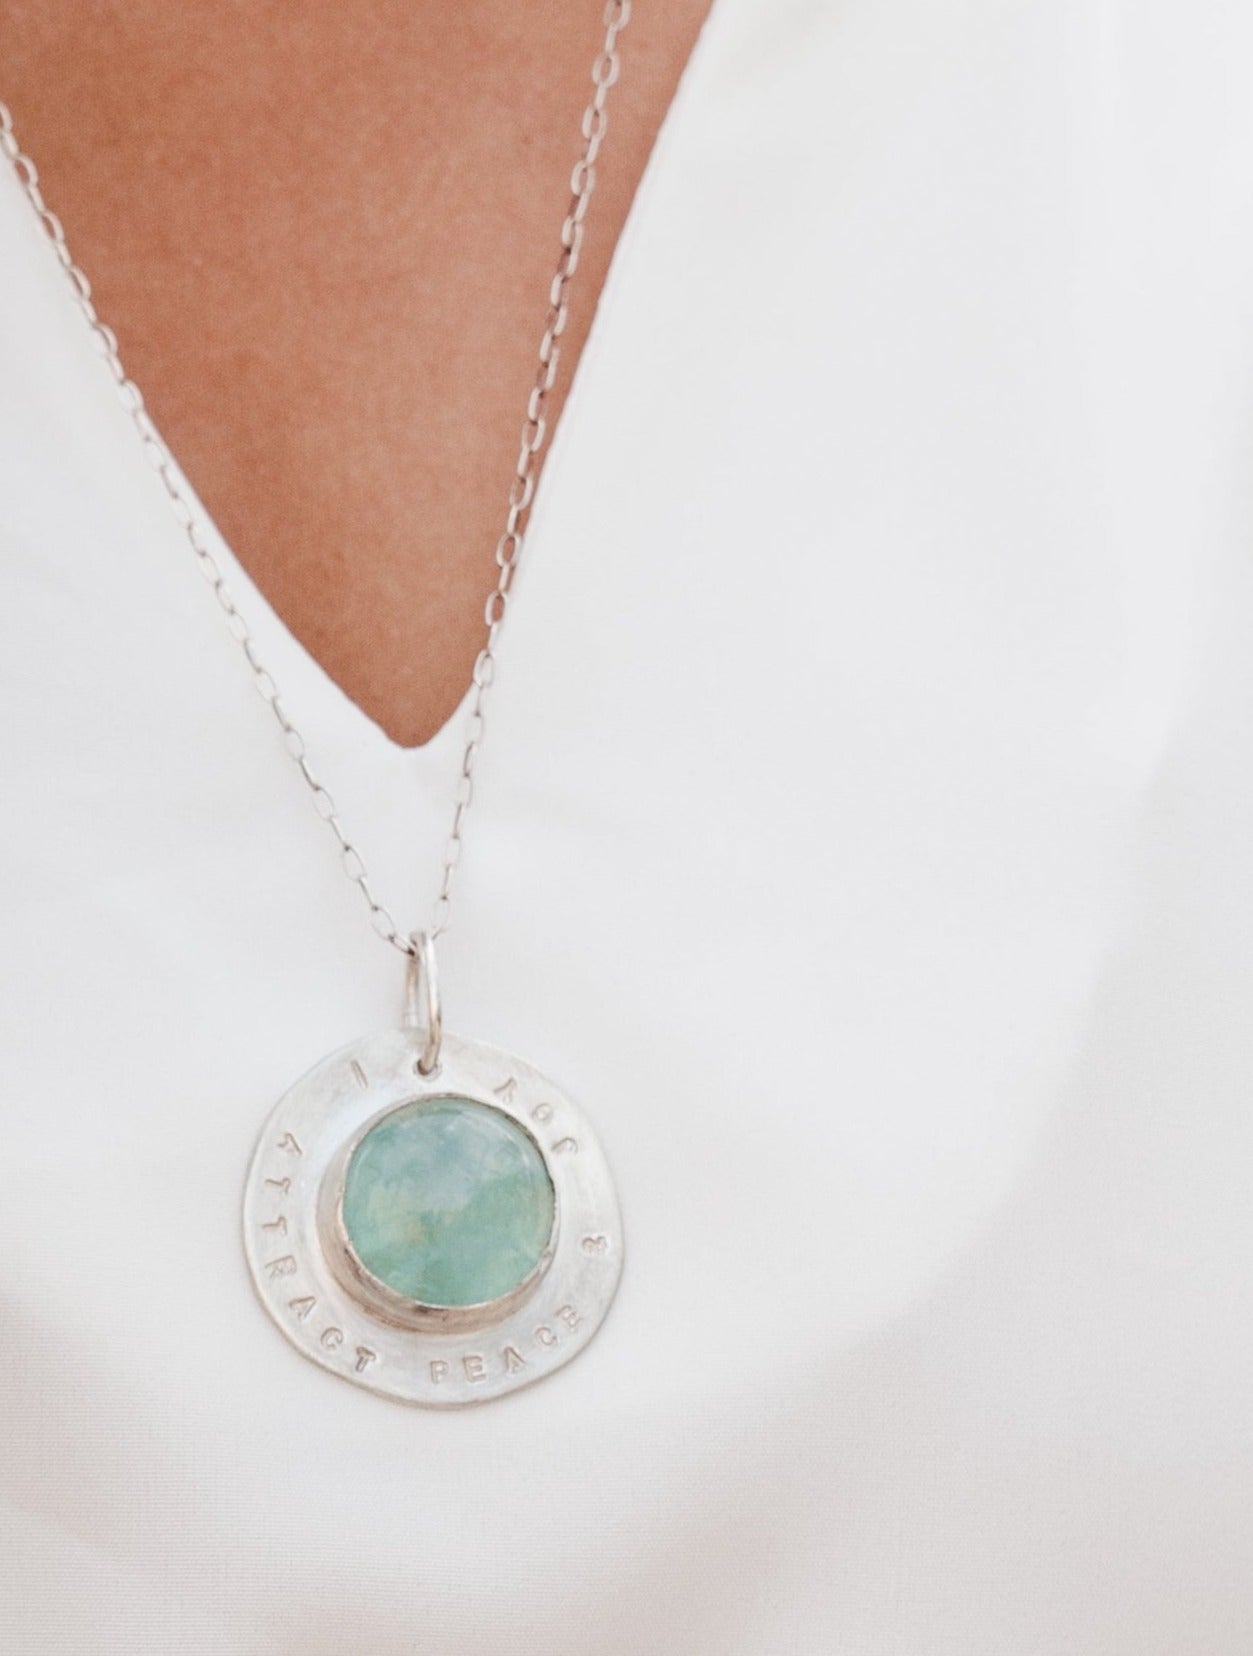 Affirmation series | I attract peace & joy- fluorite and sterling silver necklace